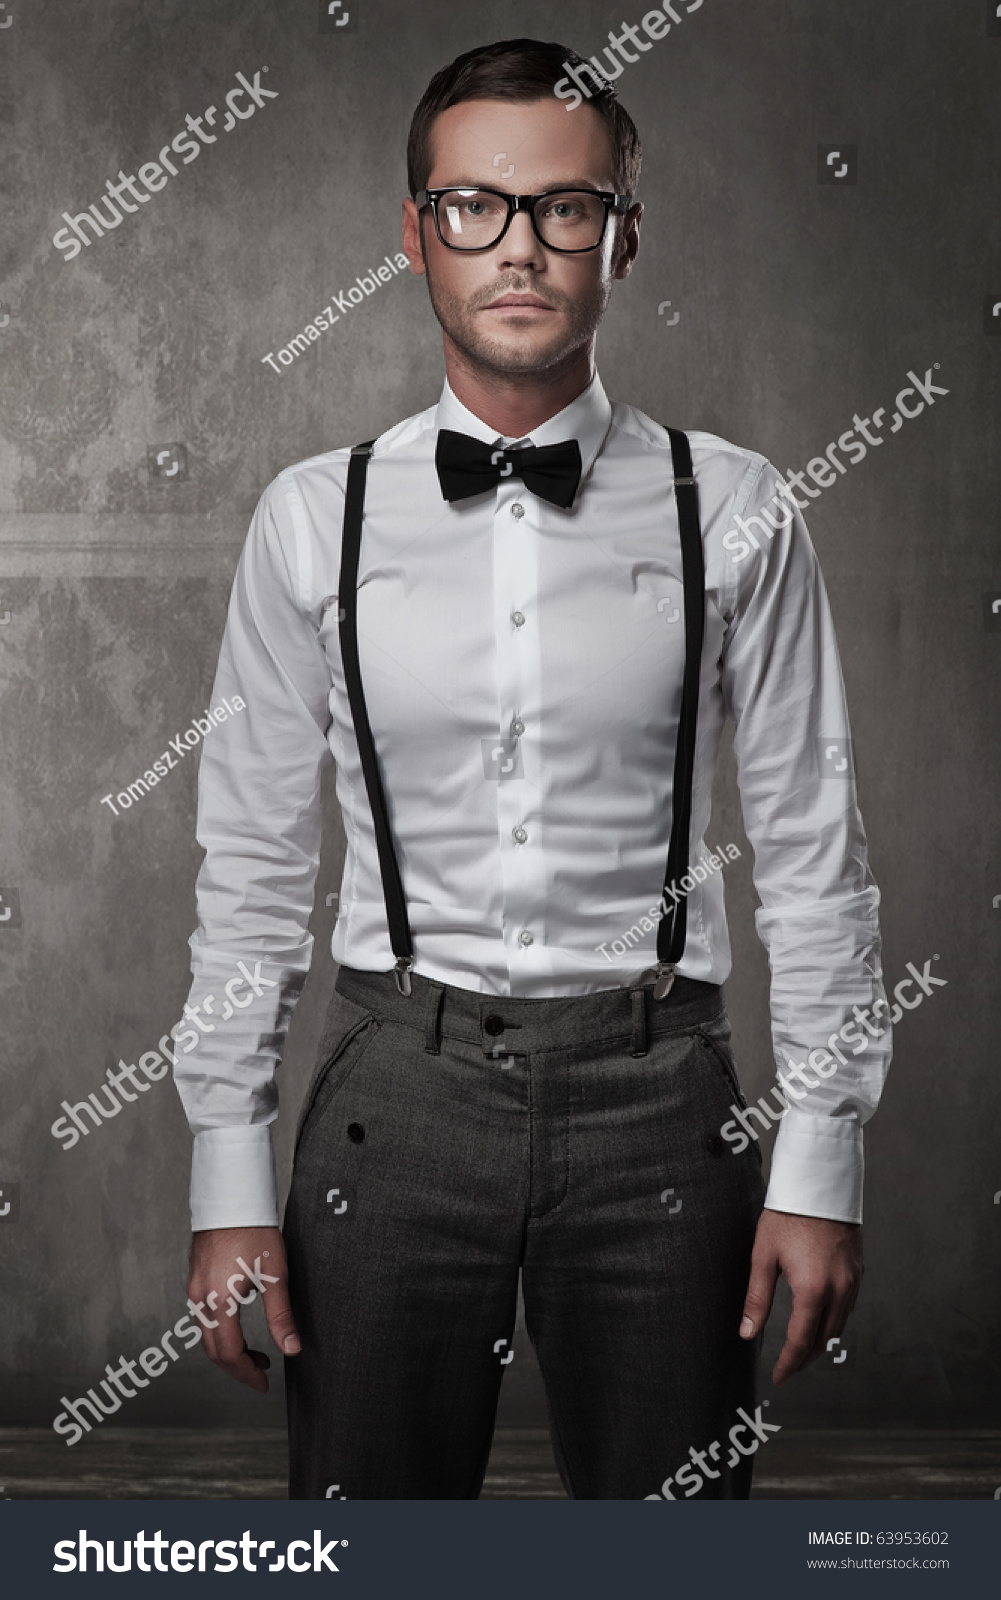 Vogue Style Photo Of A Young Man - 63953602 : Shutterstock